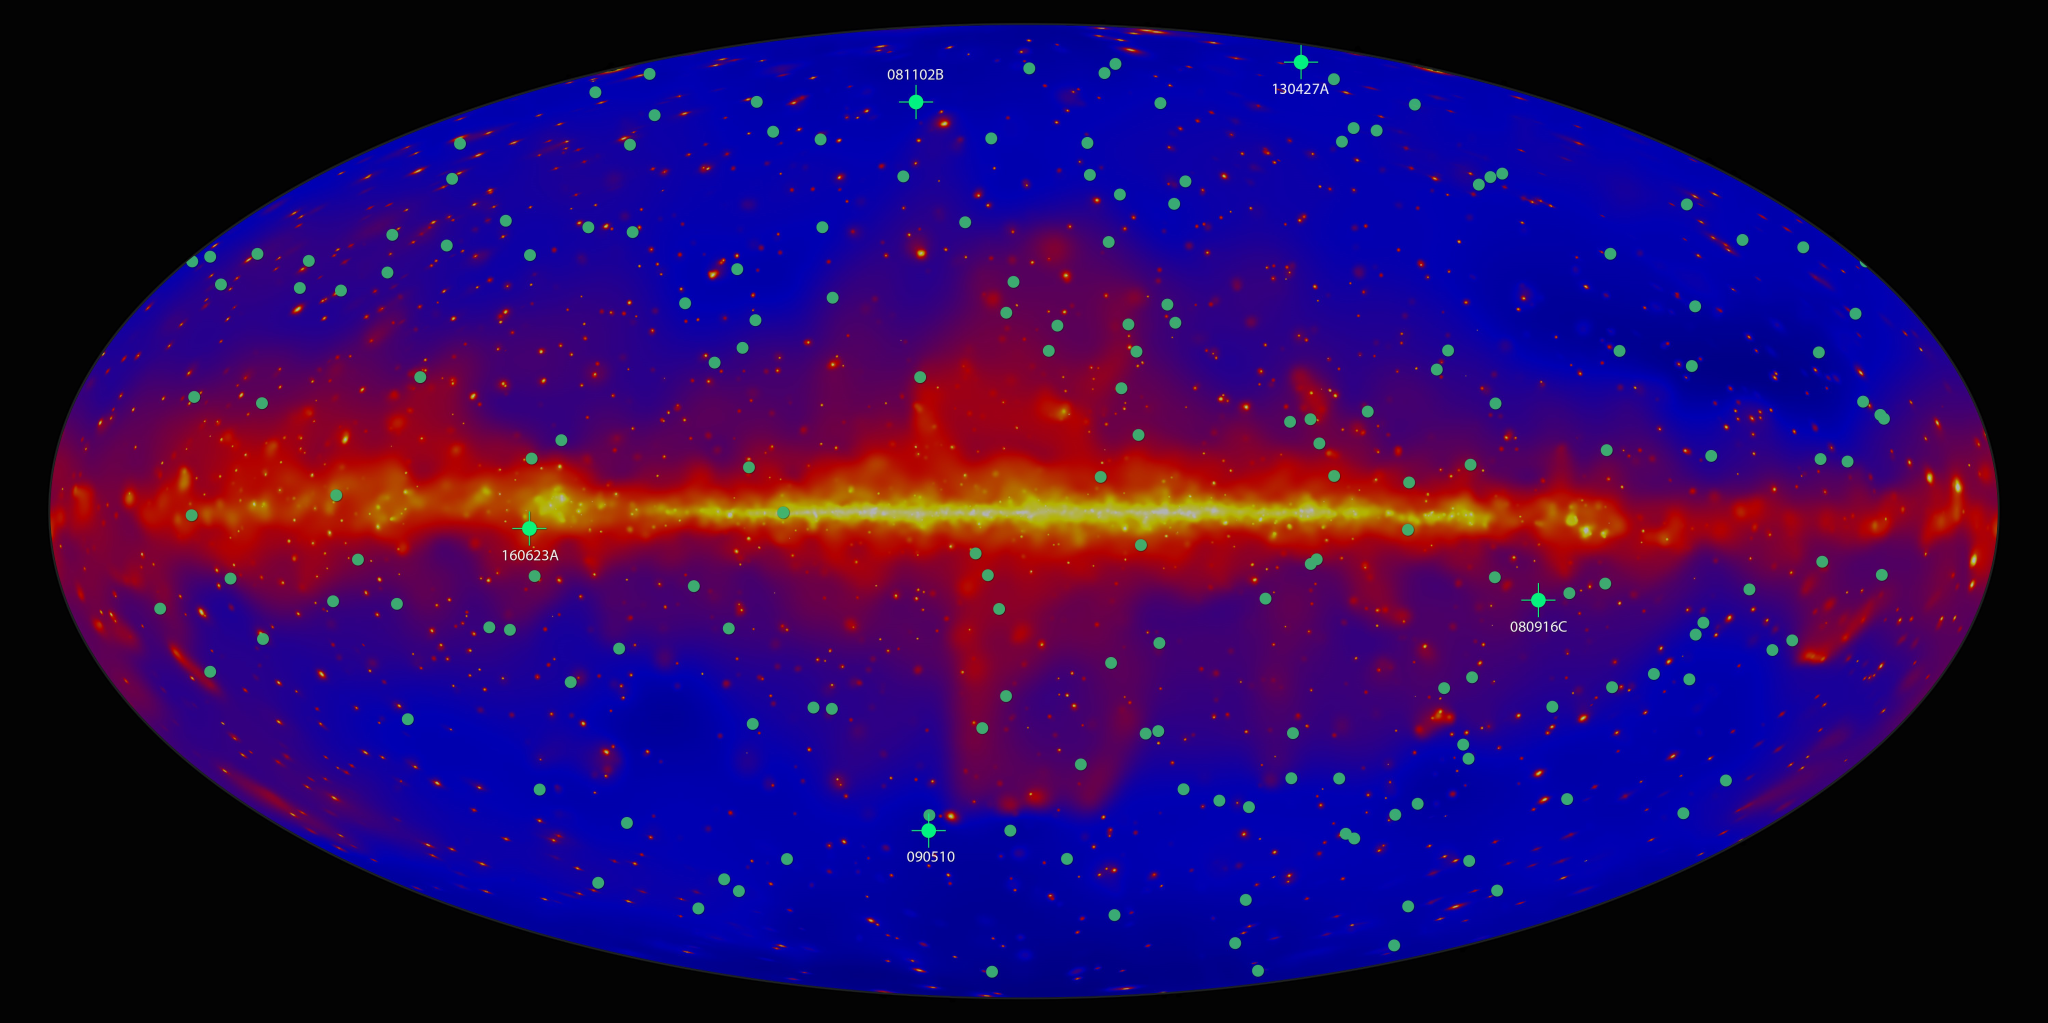 Fermi all-sky gamma-ray map with some GRBs labeled